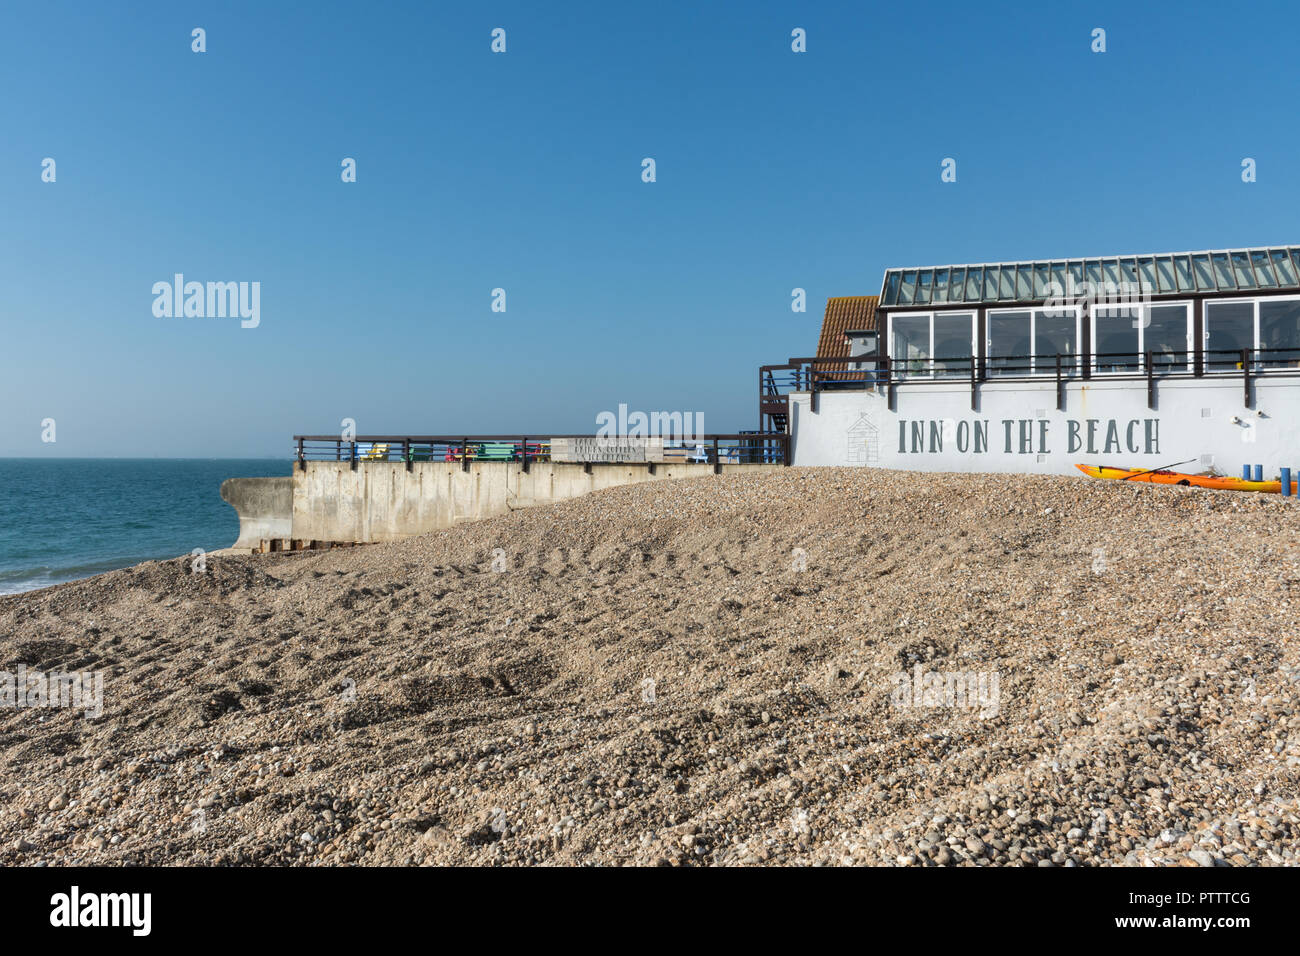 Inn on the Beach, a pub on the seafront at Hayling Island, Hampshire, UK, on a sunny day Stock Photo